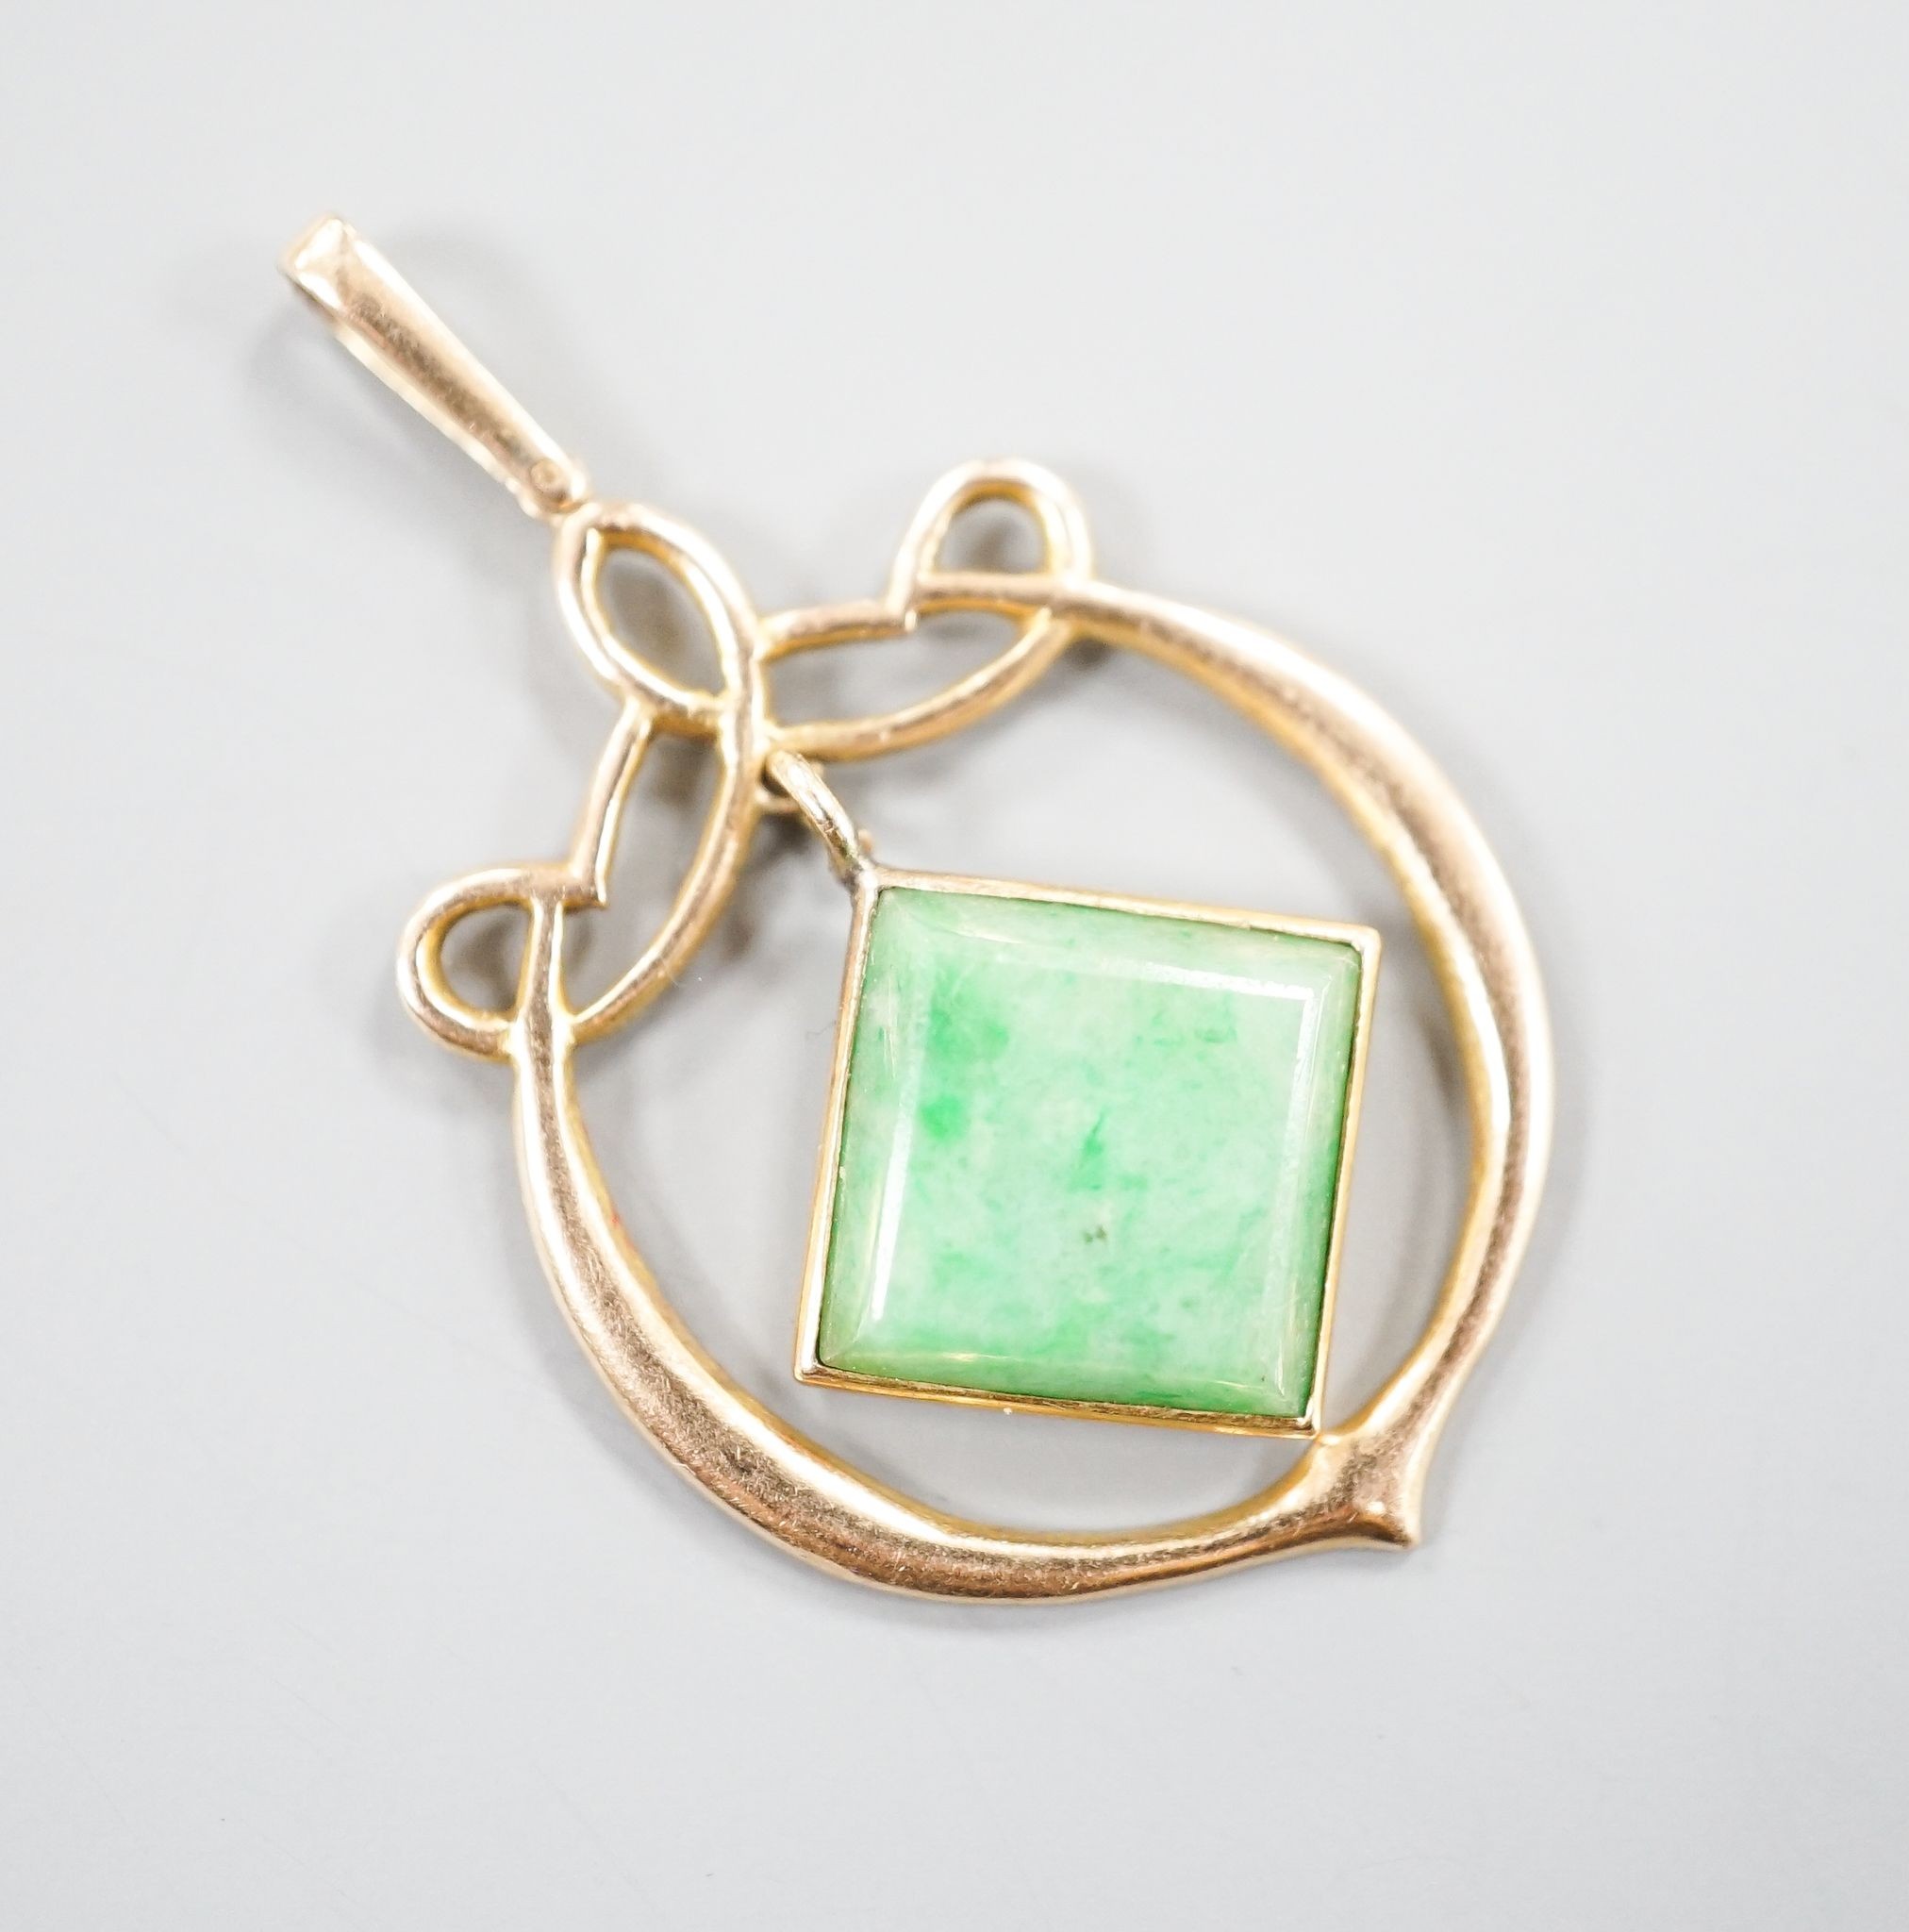 A yellow metal mounted jade pendant, overall 35mm, gross 2.6 grams.